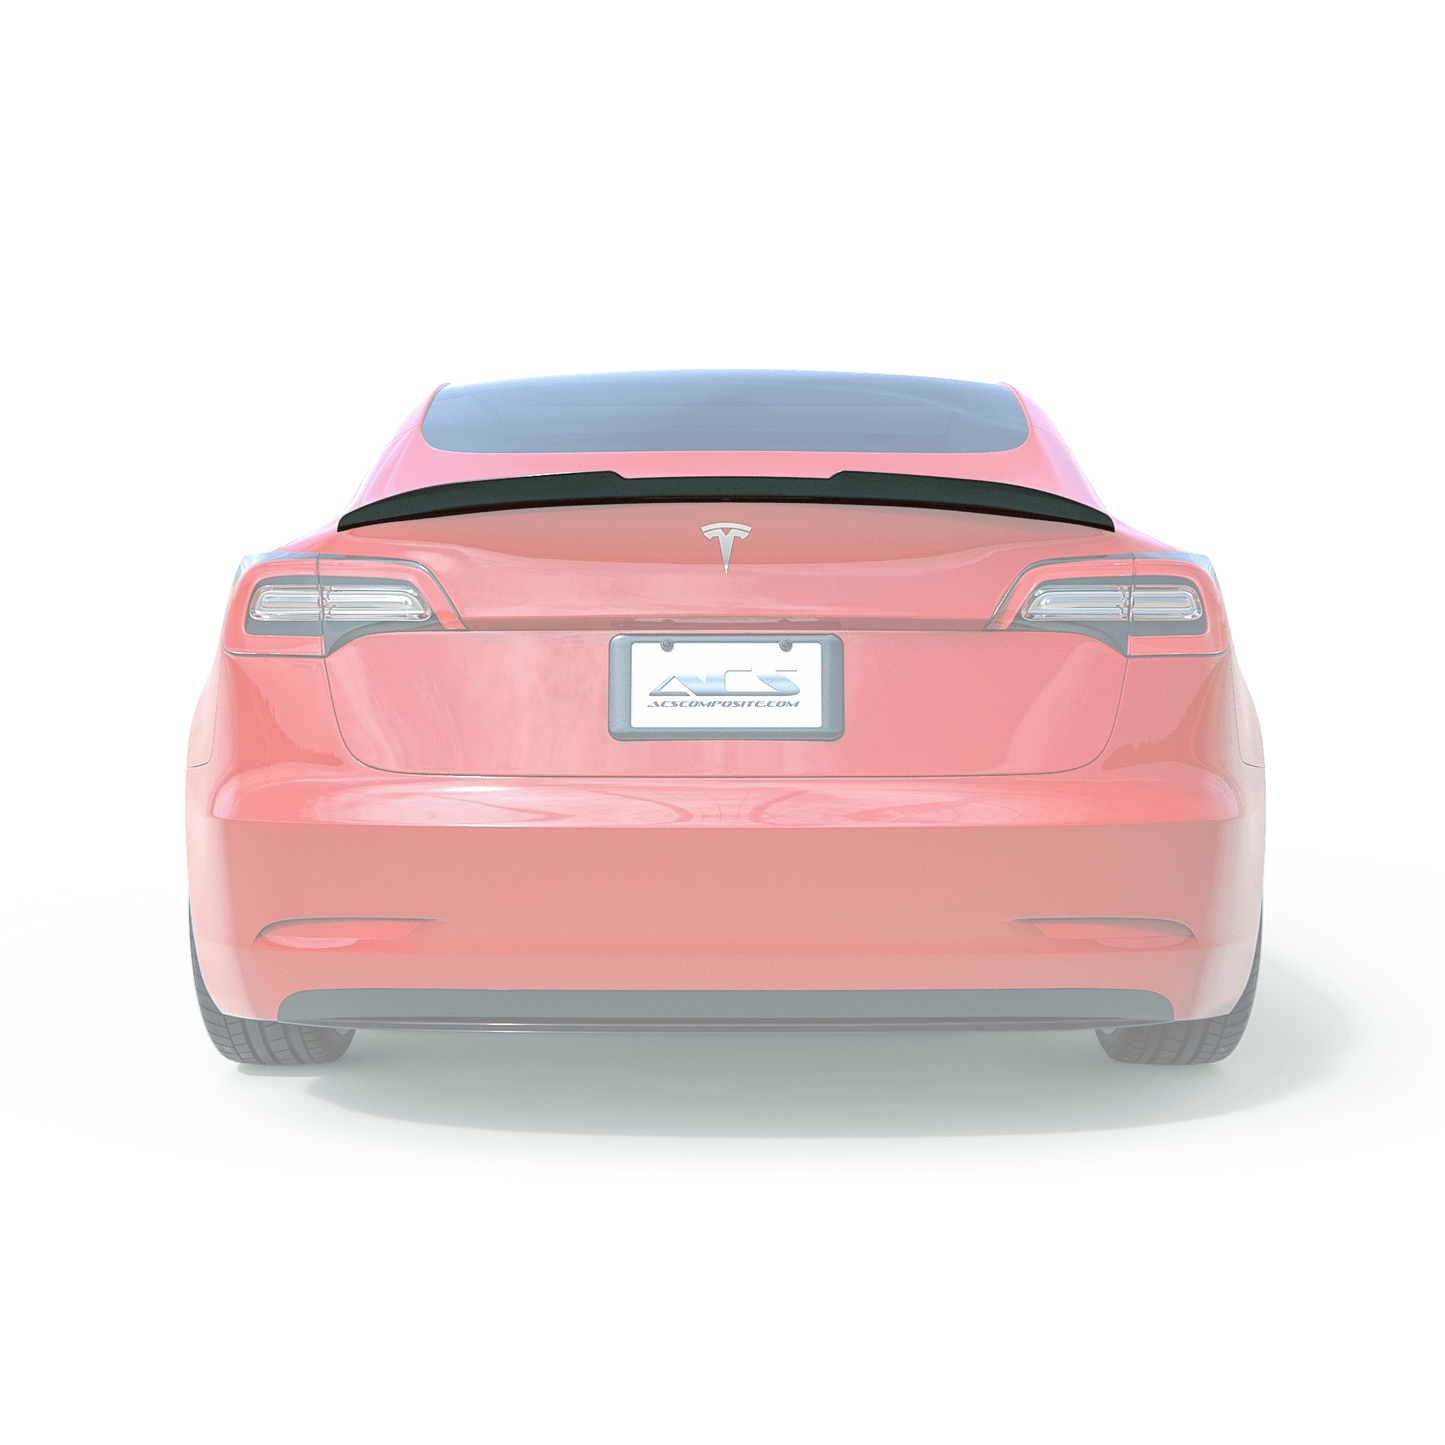 ACS Composite Tesla Model 3 Spoiler in Gloss Black finish, SKU 51-4-001, adds sporty look to the low profile duckbill shape of the trunk.